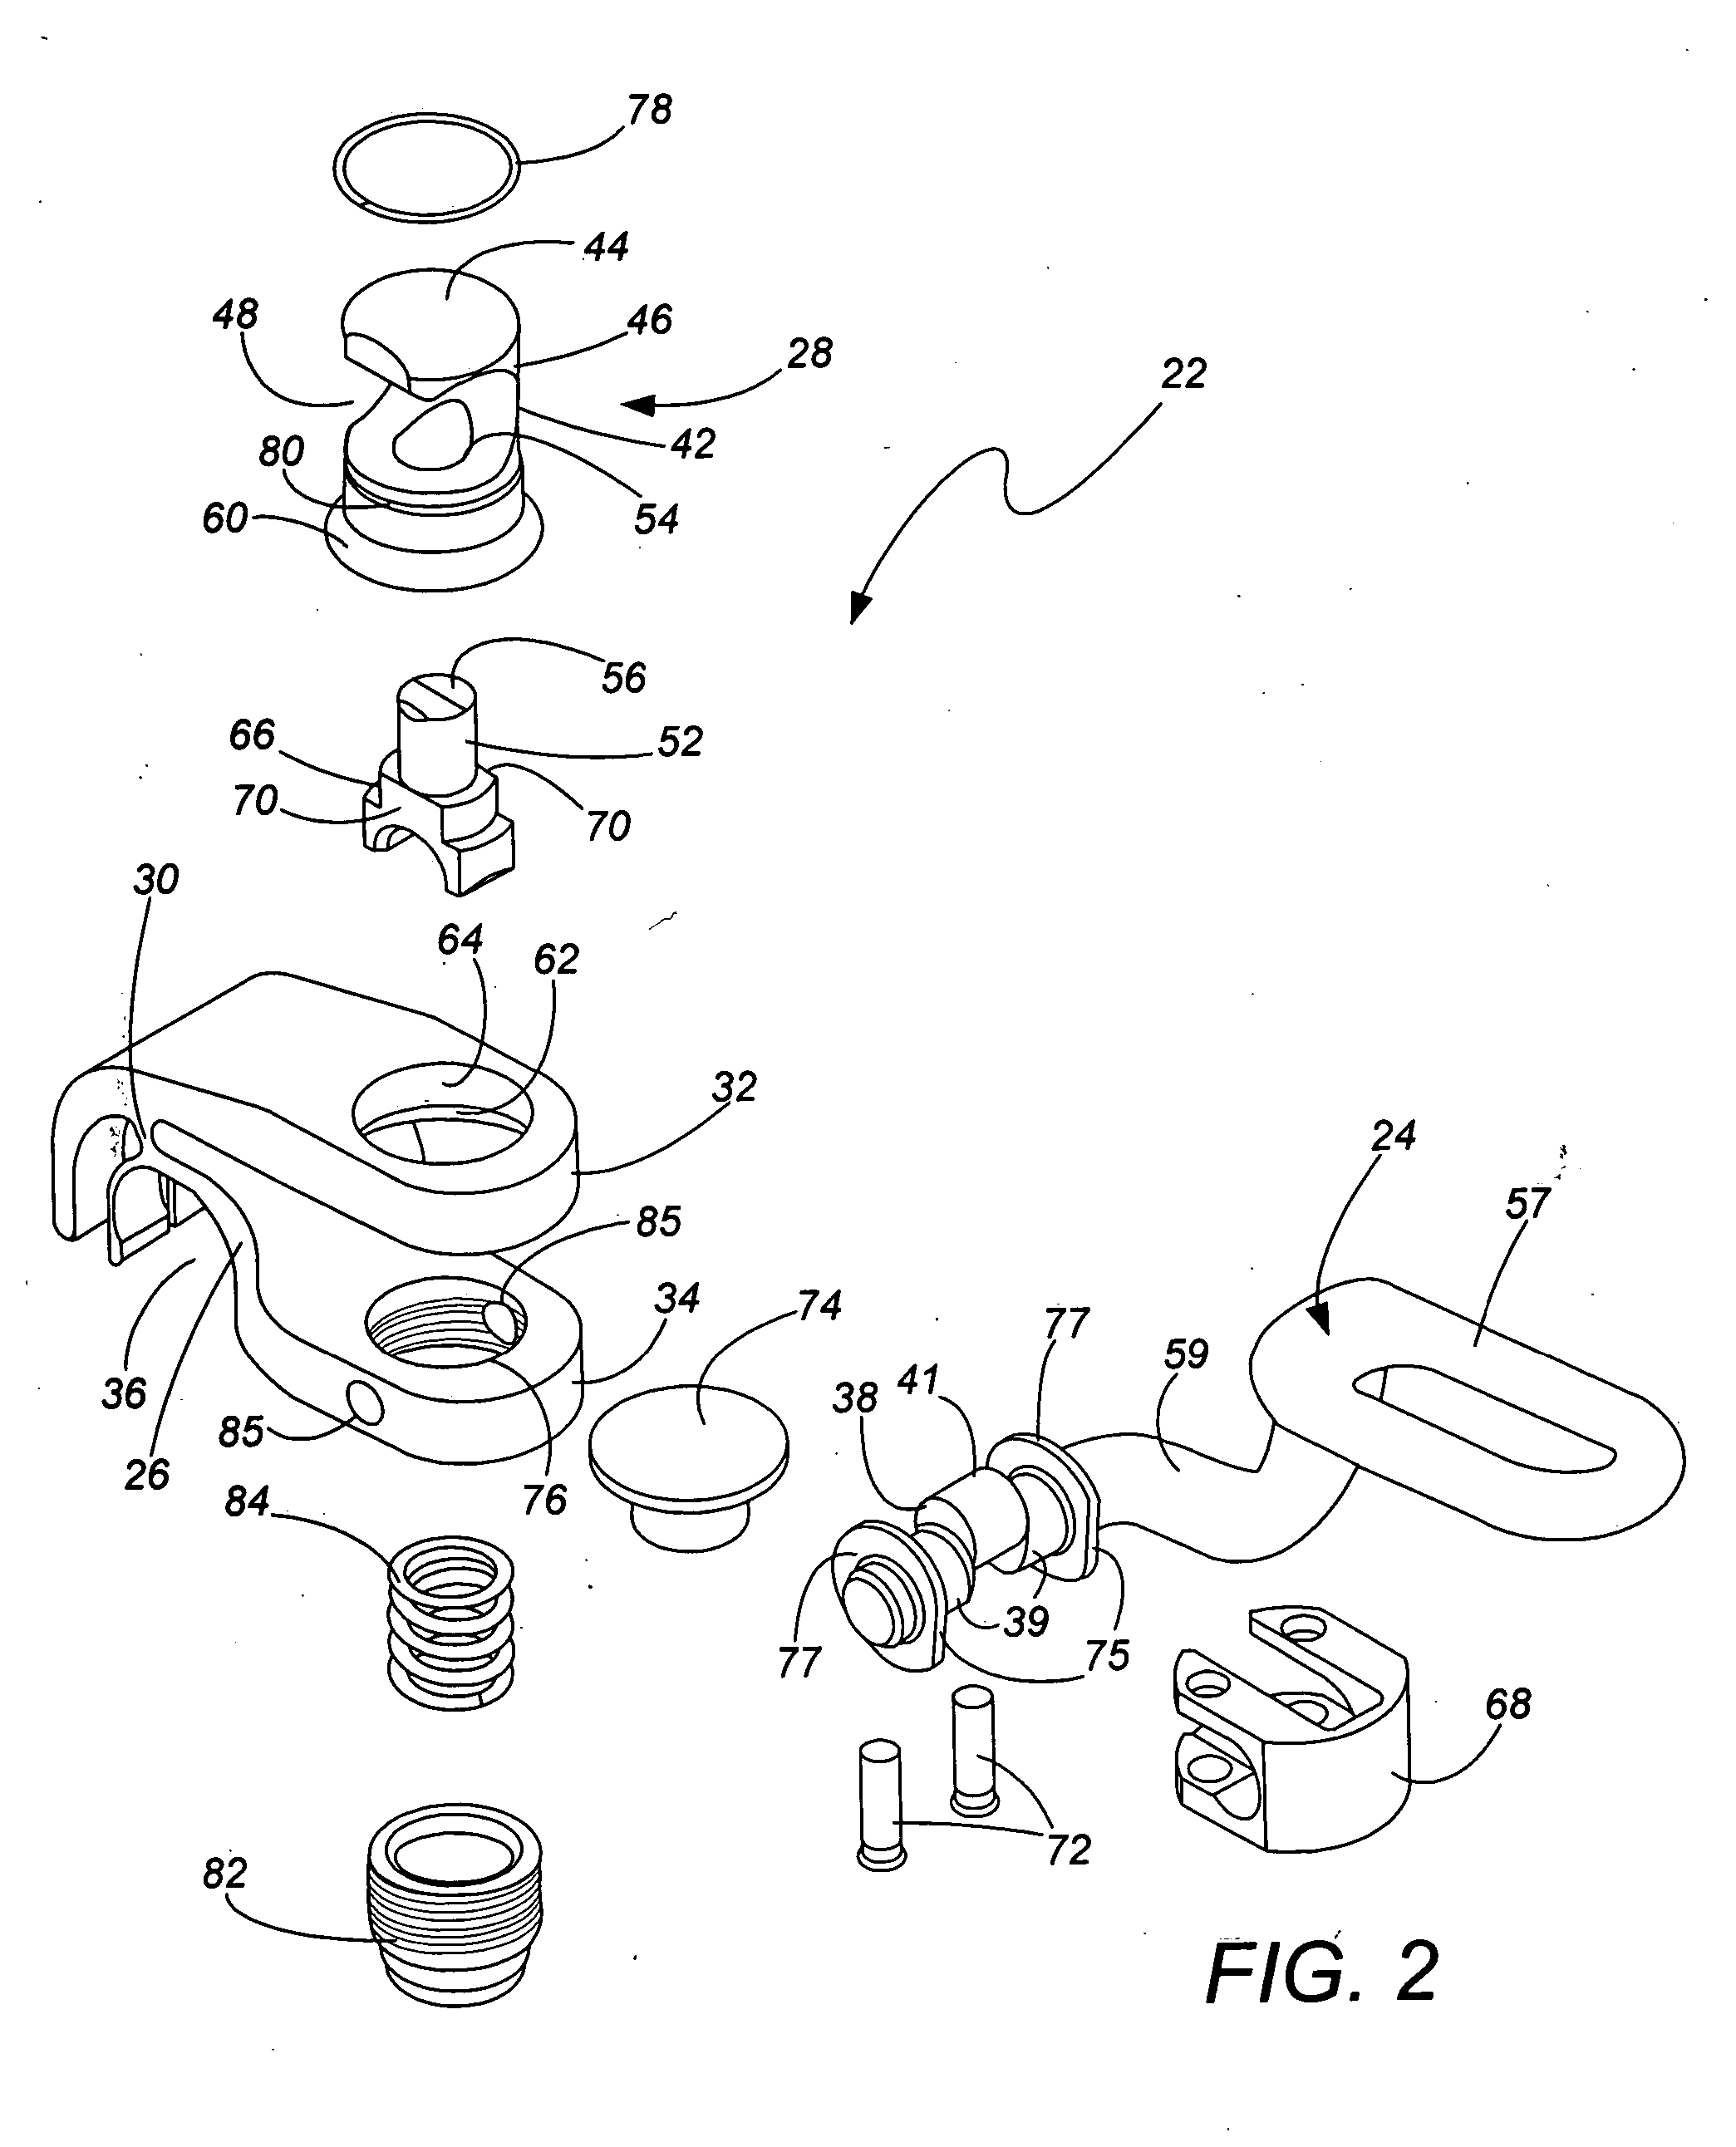 Method of making a surgical clamp